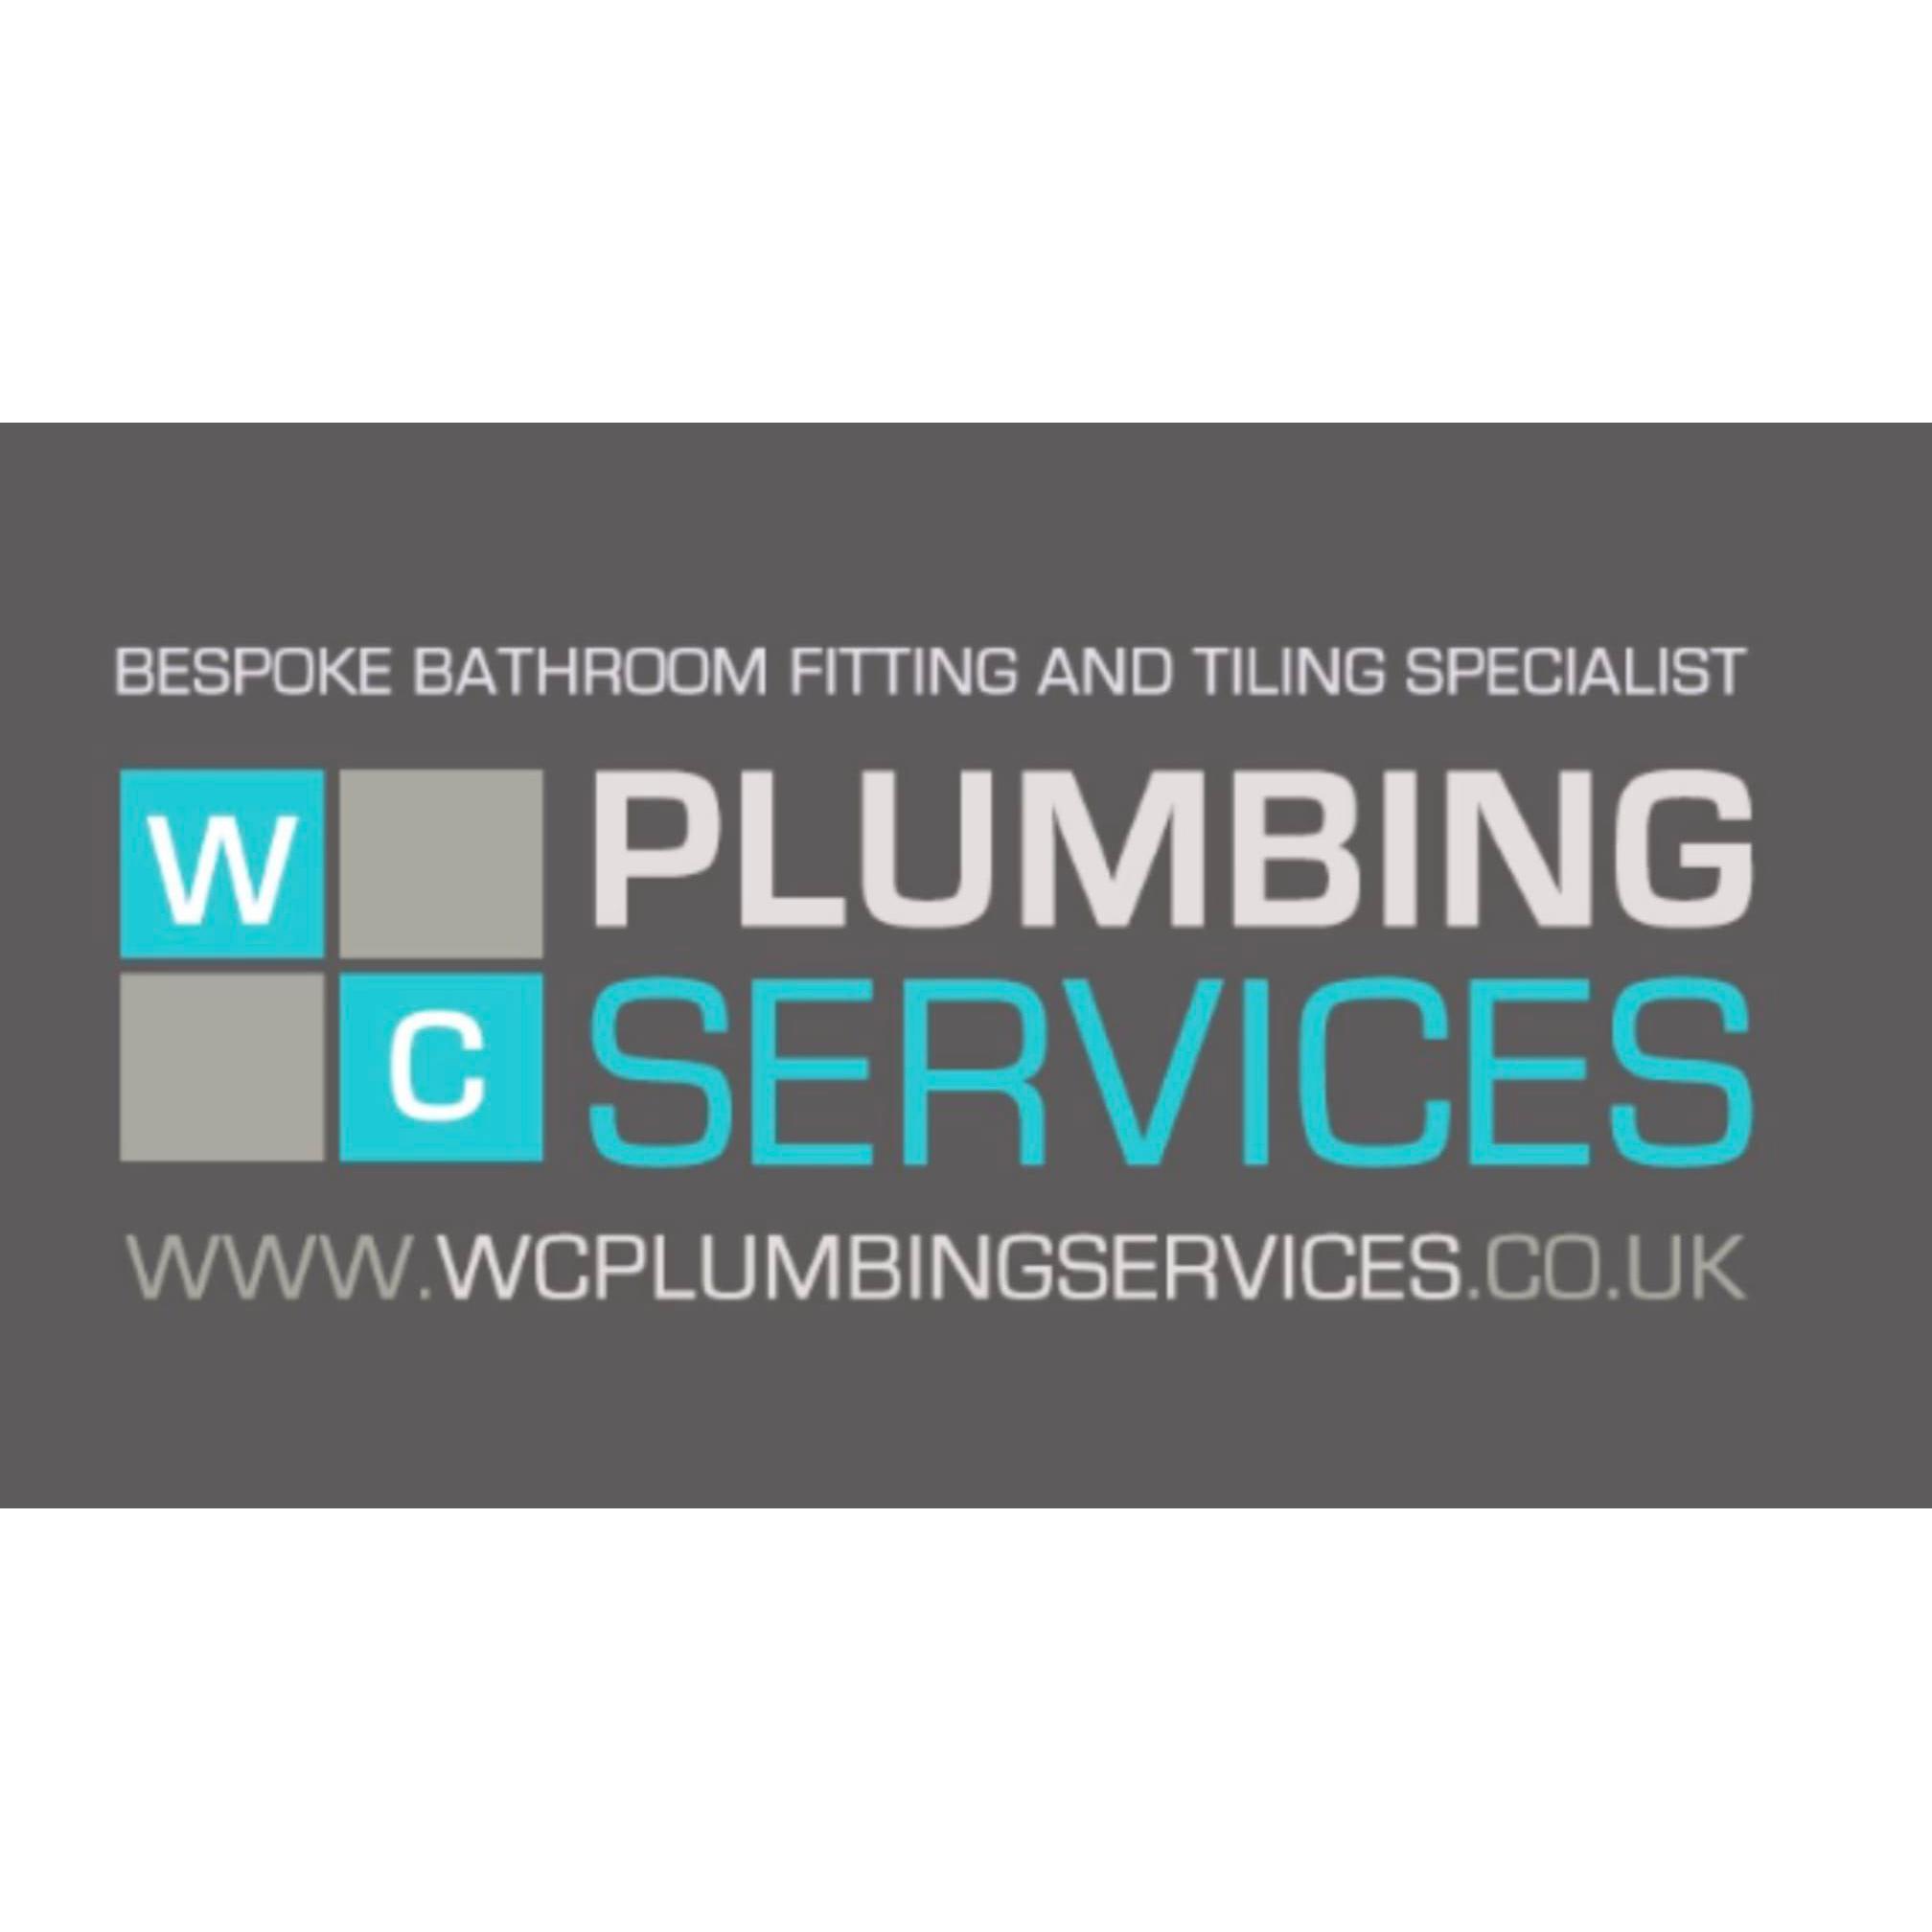 W.C. Plumbing Services - Barnsley, South Yorkshire S71 5DL - 07988 152415 | ShowMeLocal.com